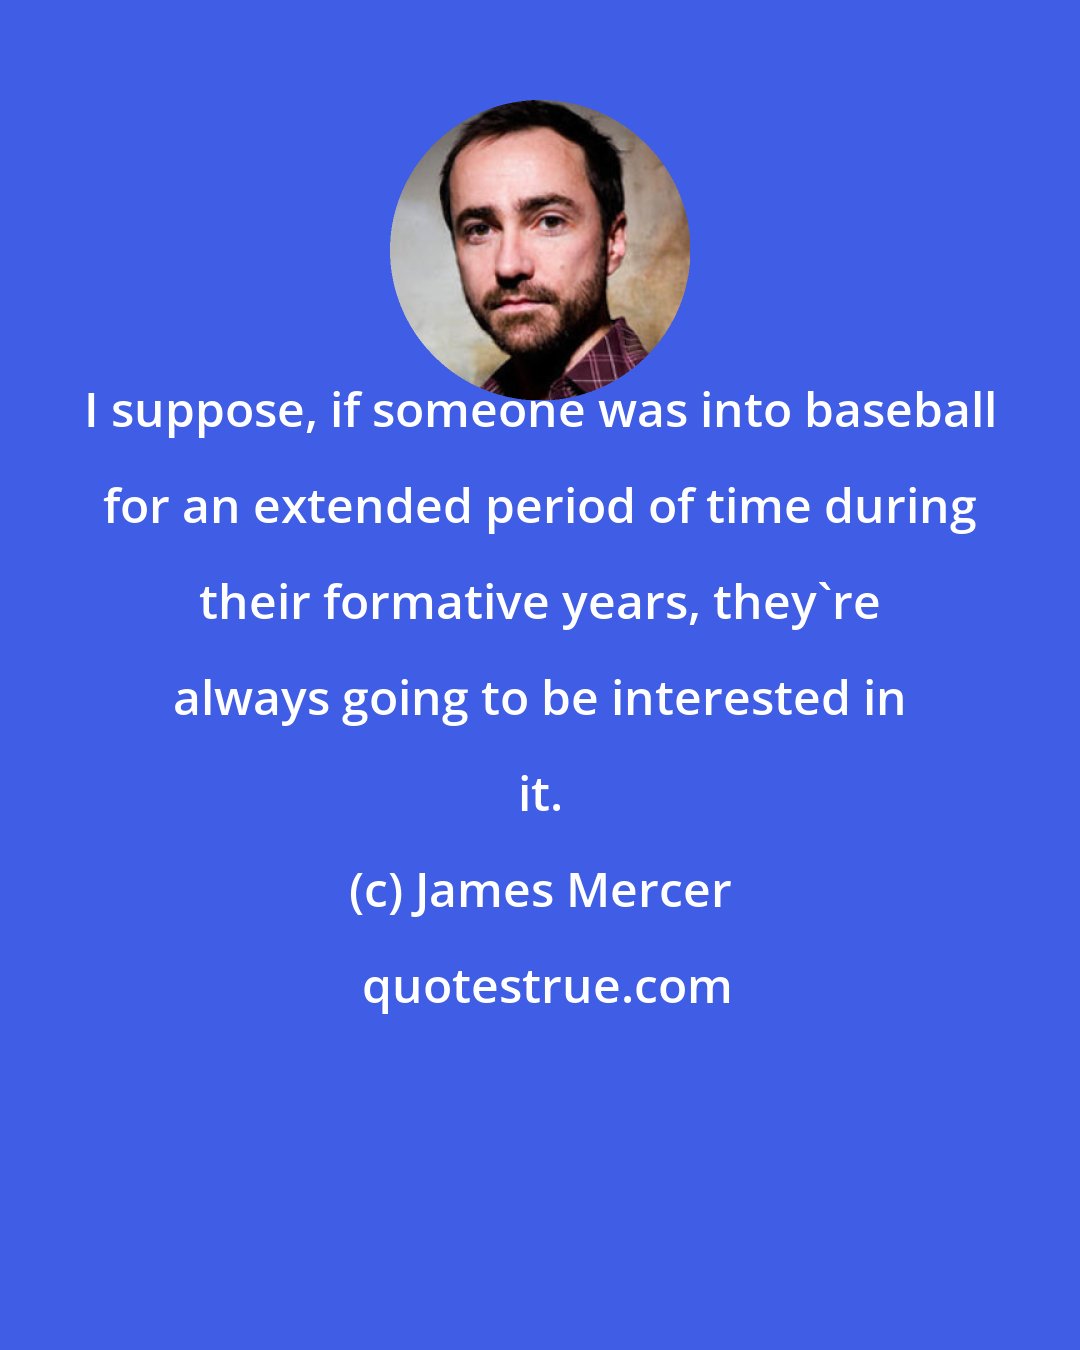 James Mercer: I suppose, if someone was into baseball for an extended period of time during their formative years, they're always going to be interested in it.